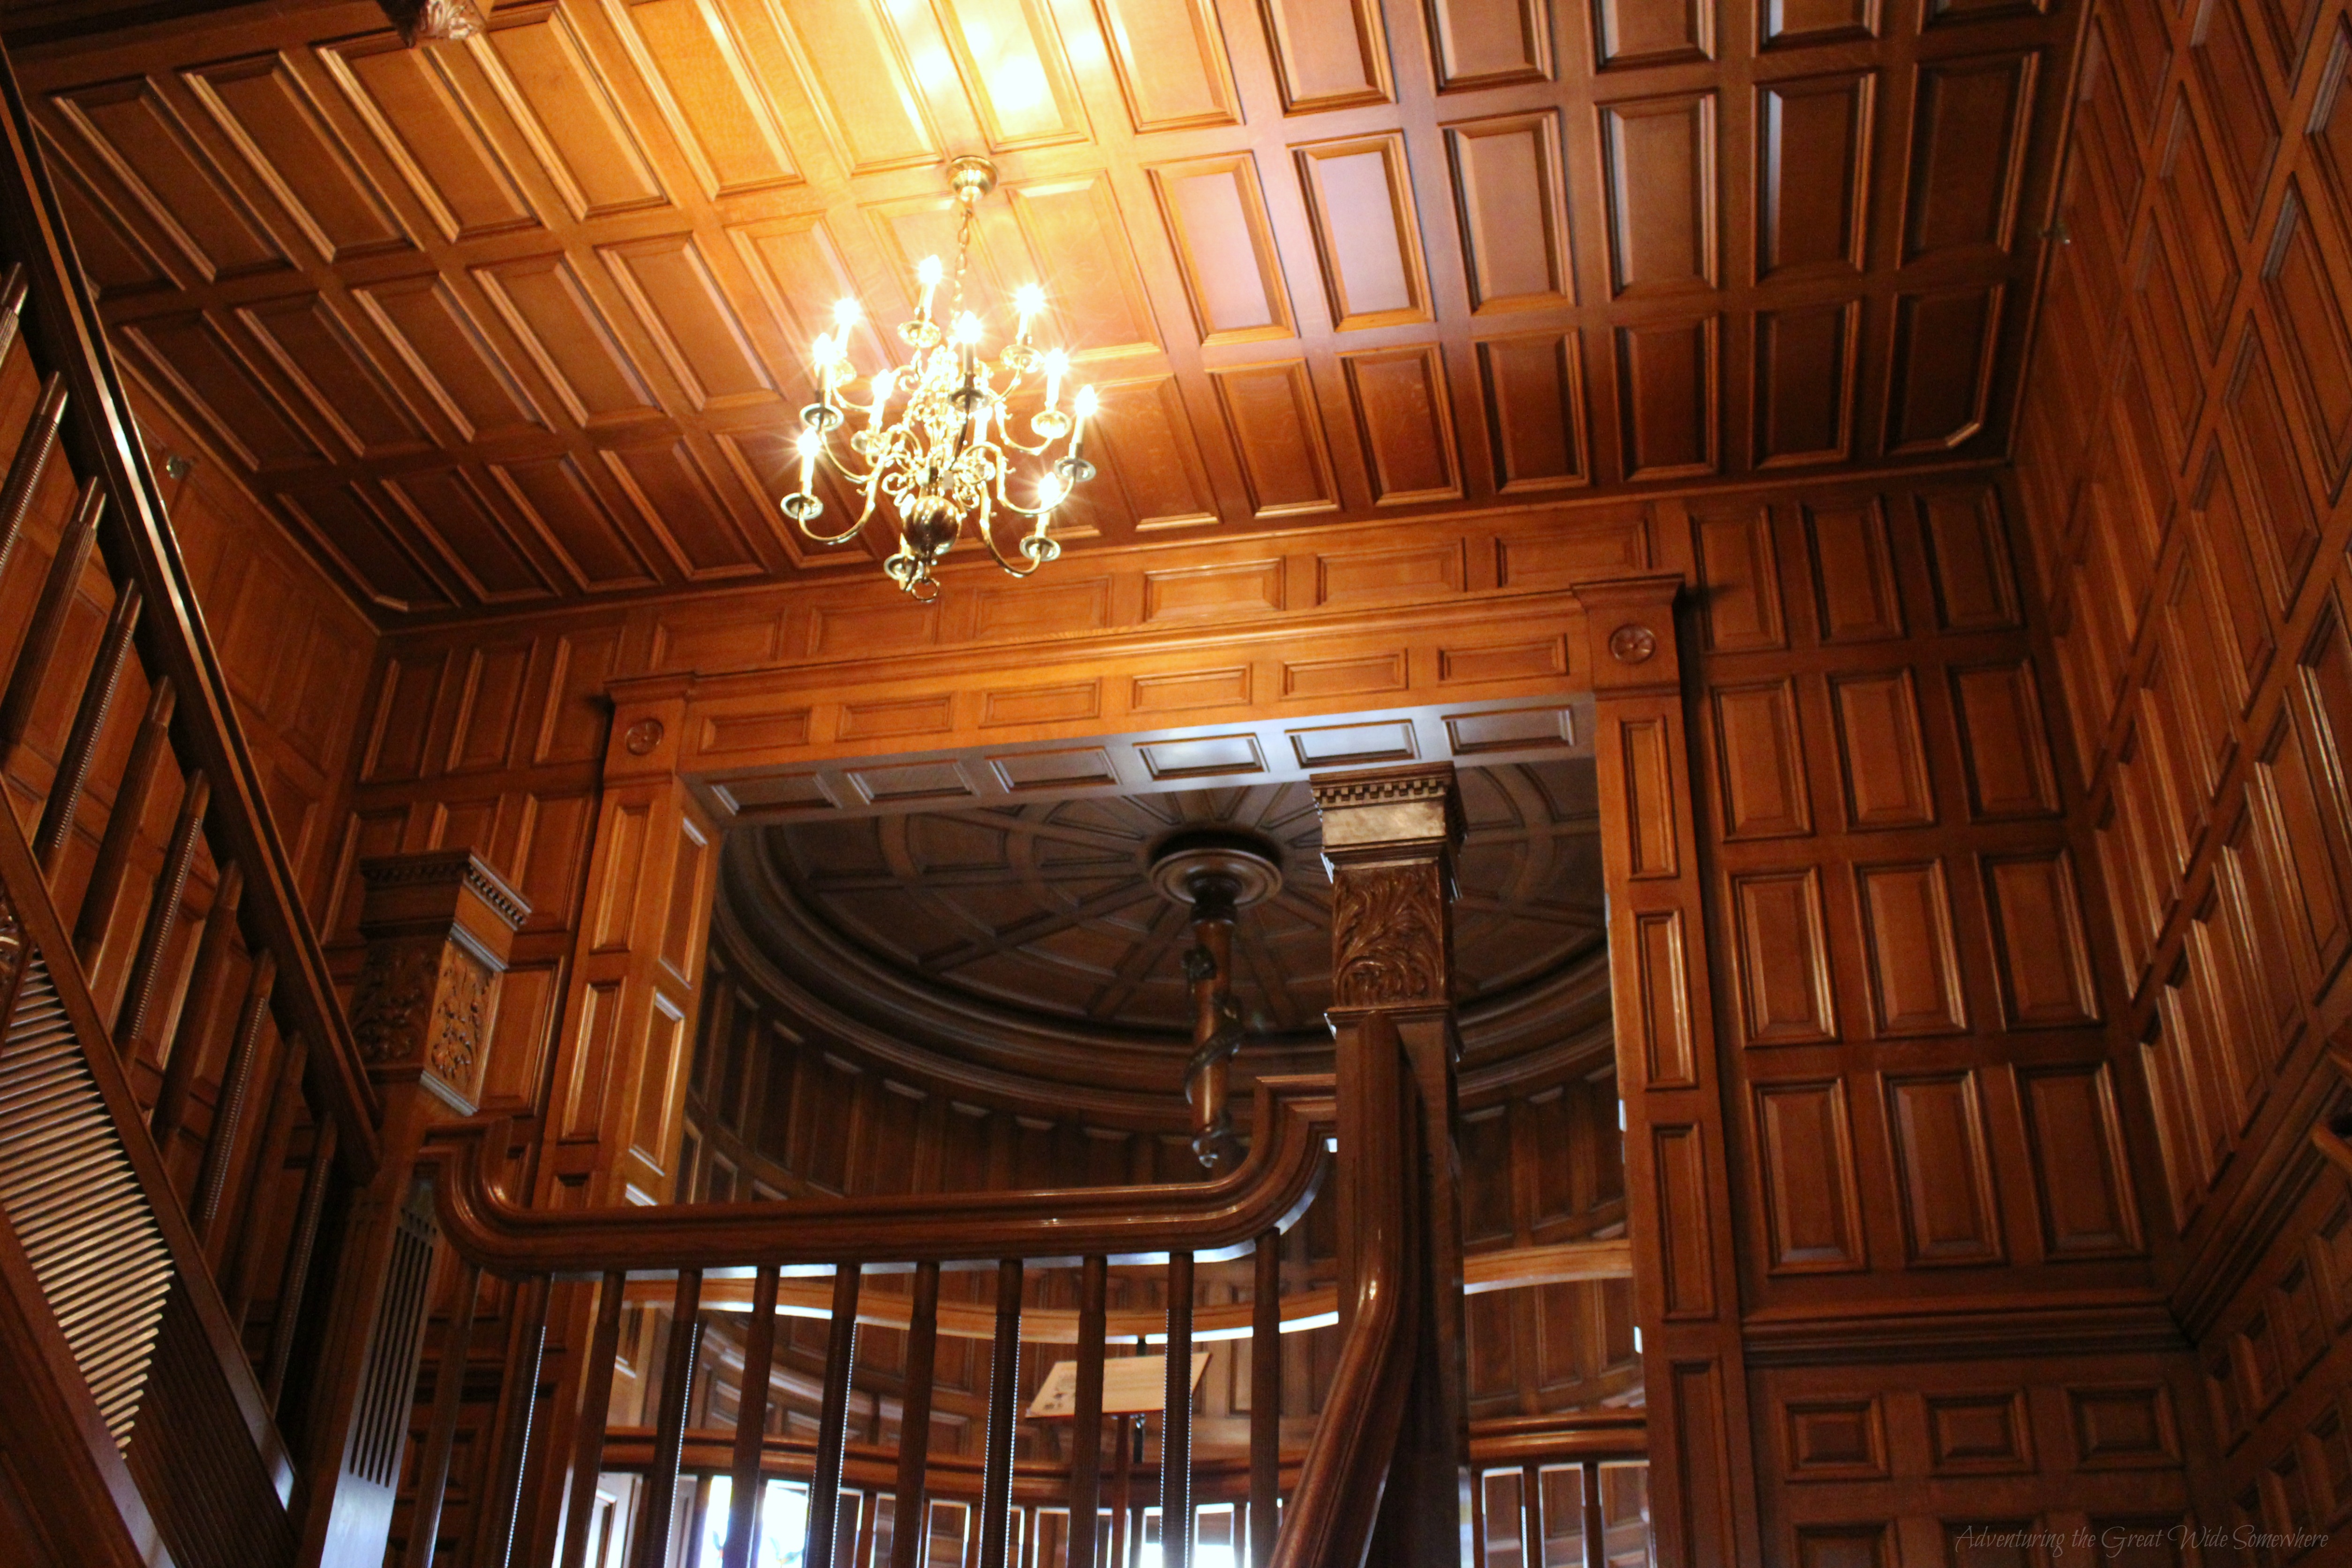 Majestic Wood Paneled Staircases Abound at Craigdarroch Castle.jpg